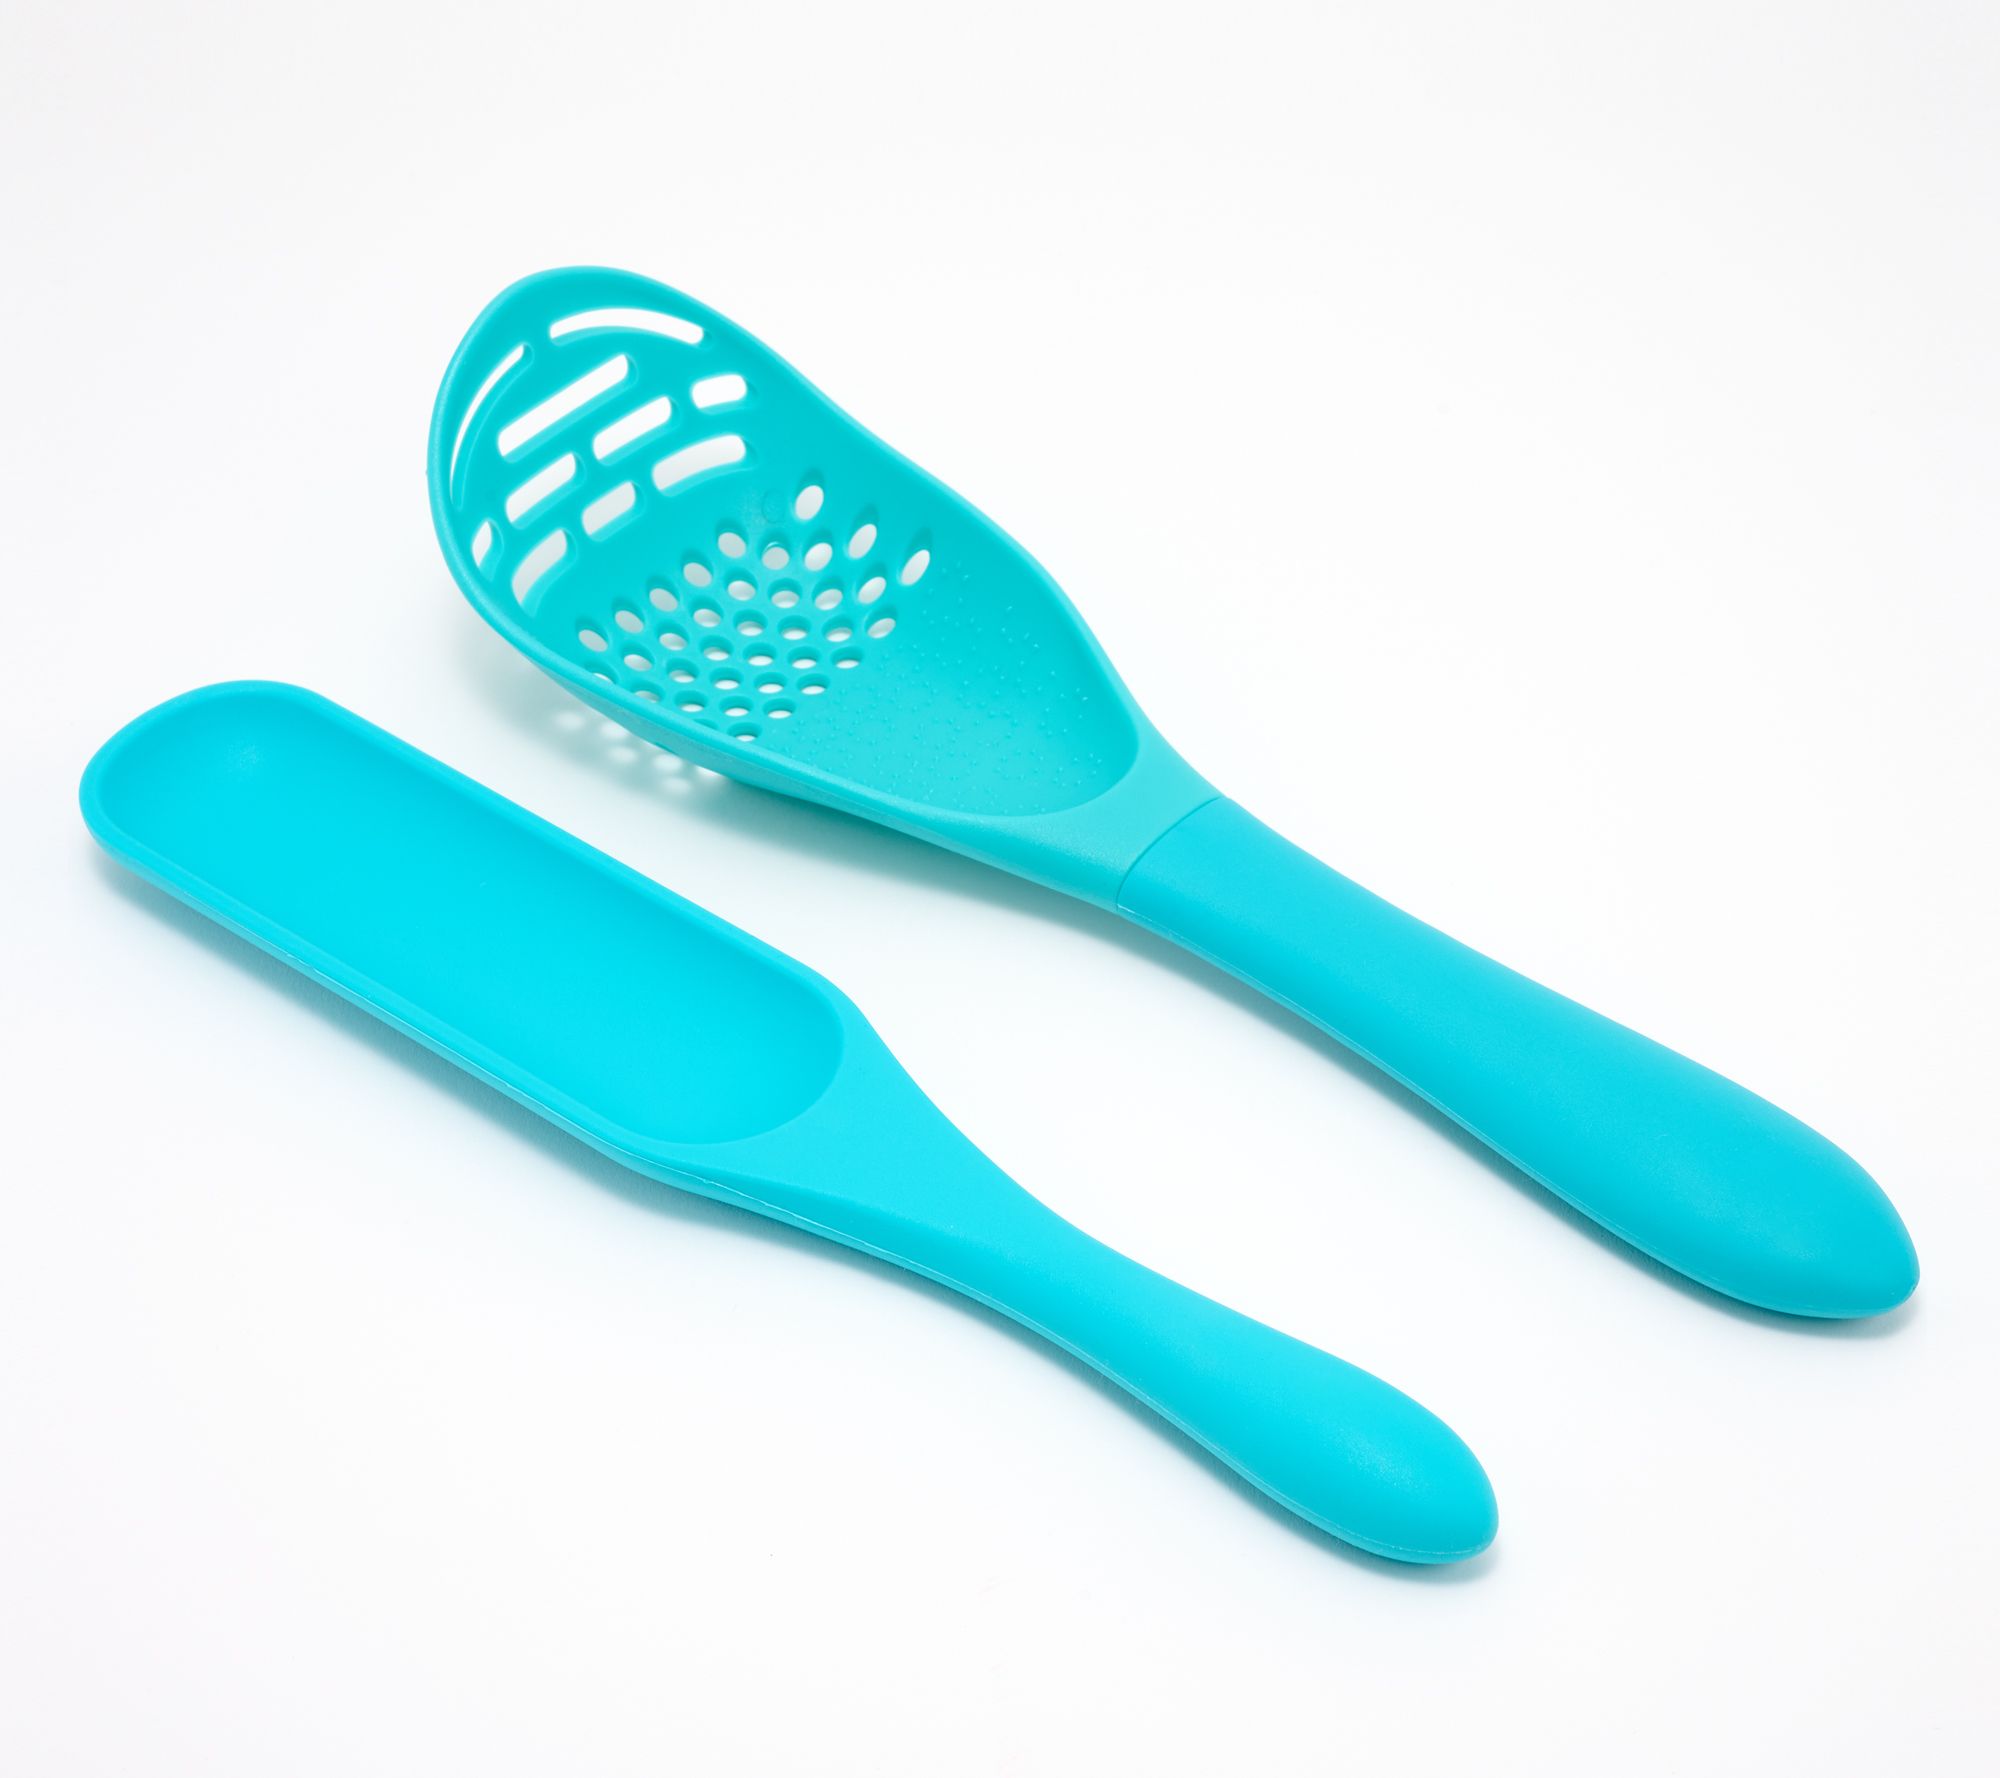 Mad Hungry 2-piece Scooper Spurtle Set : Target